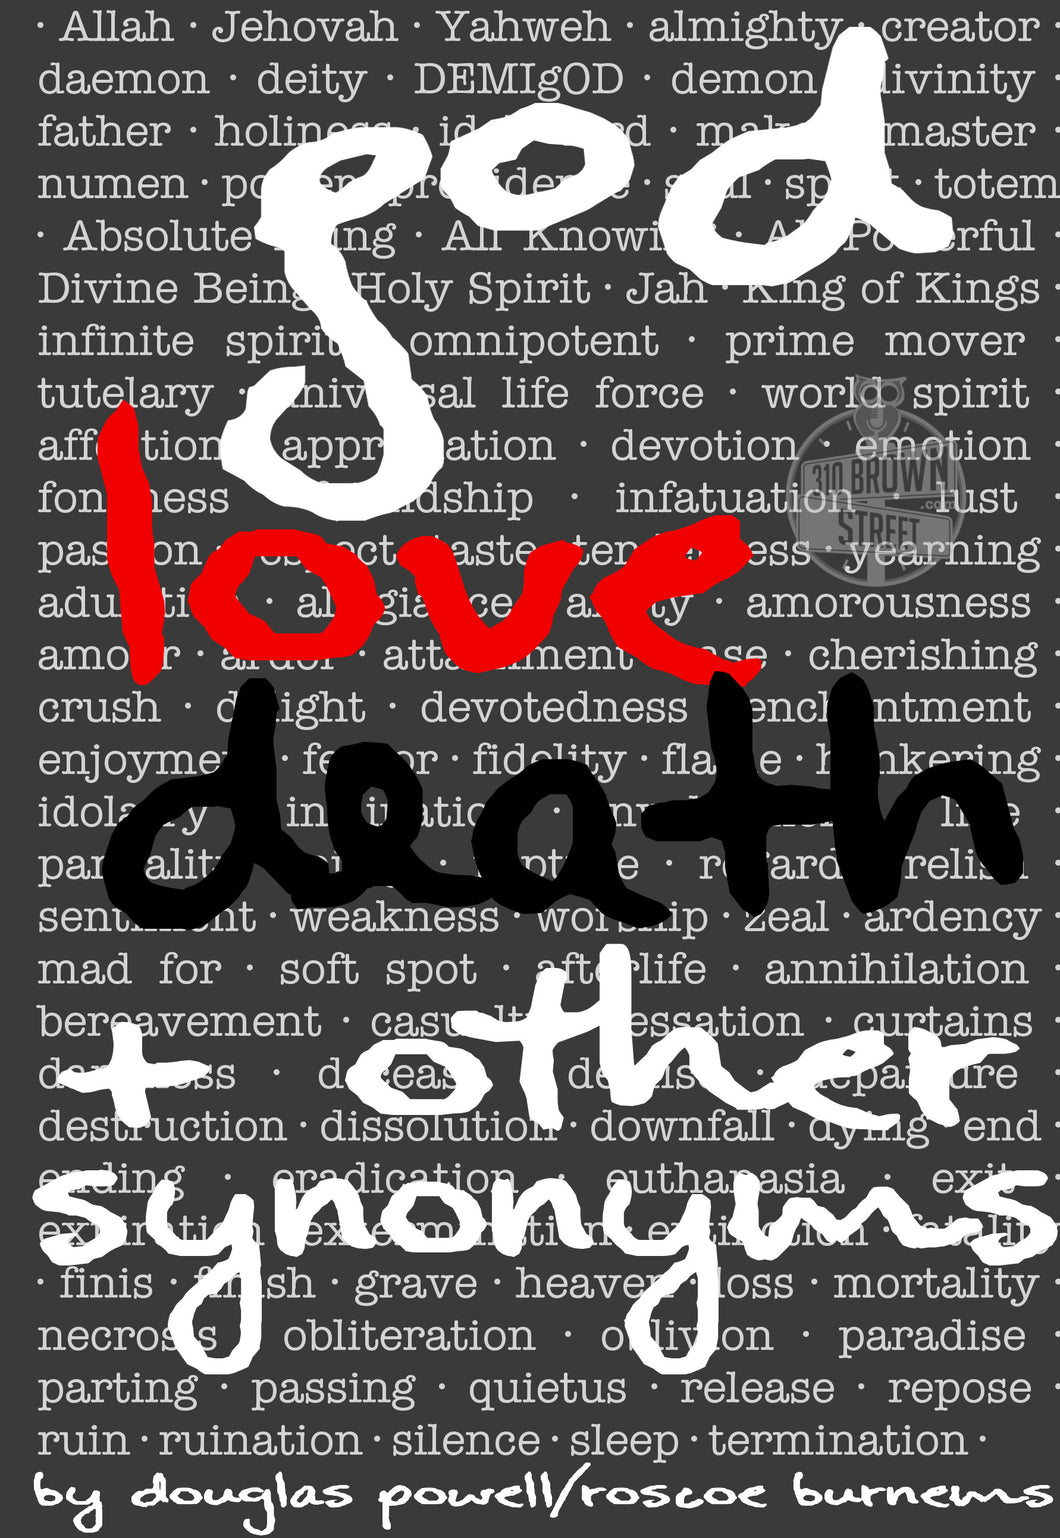 god, love, death & other synonyms